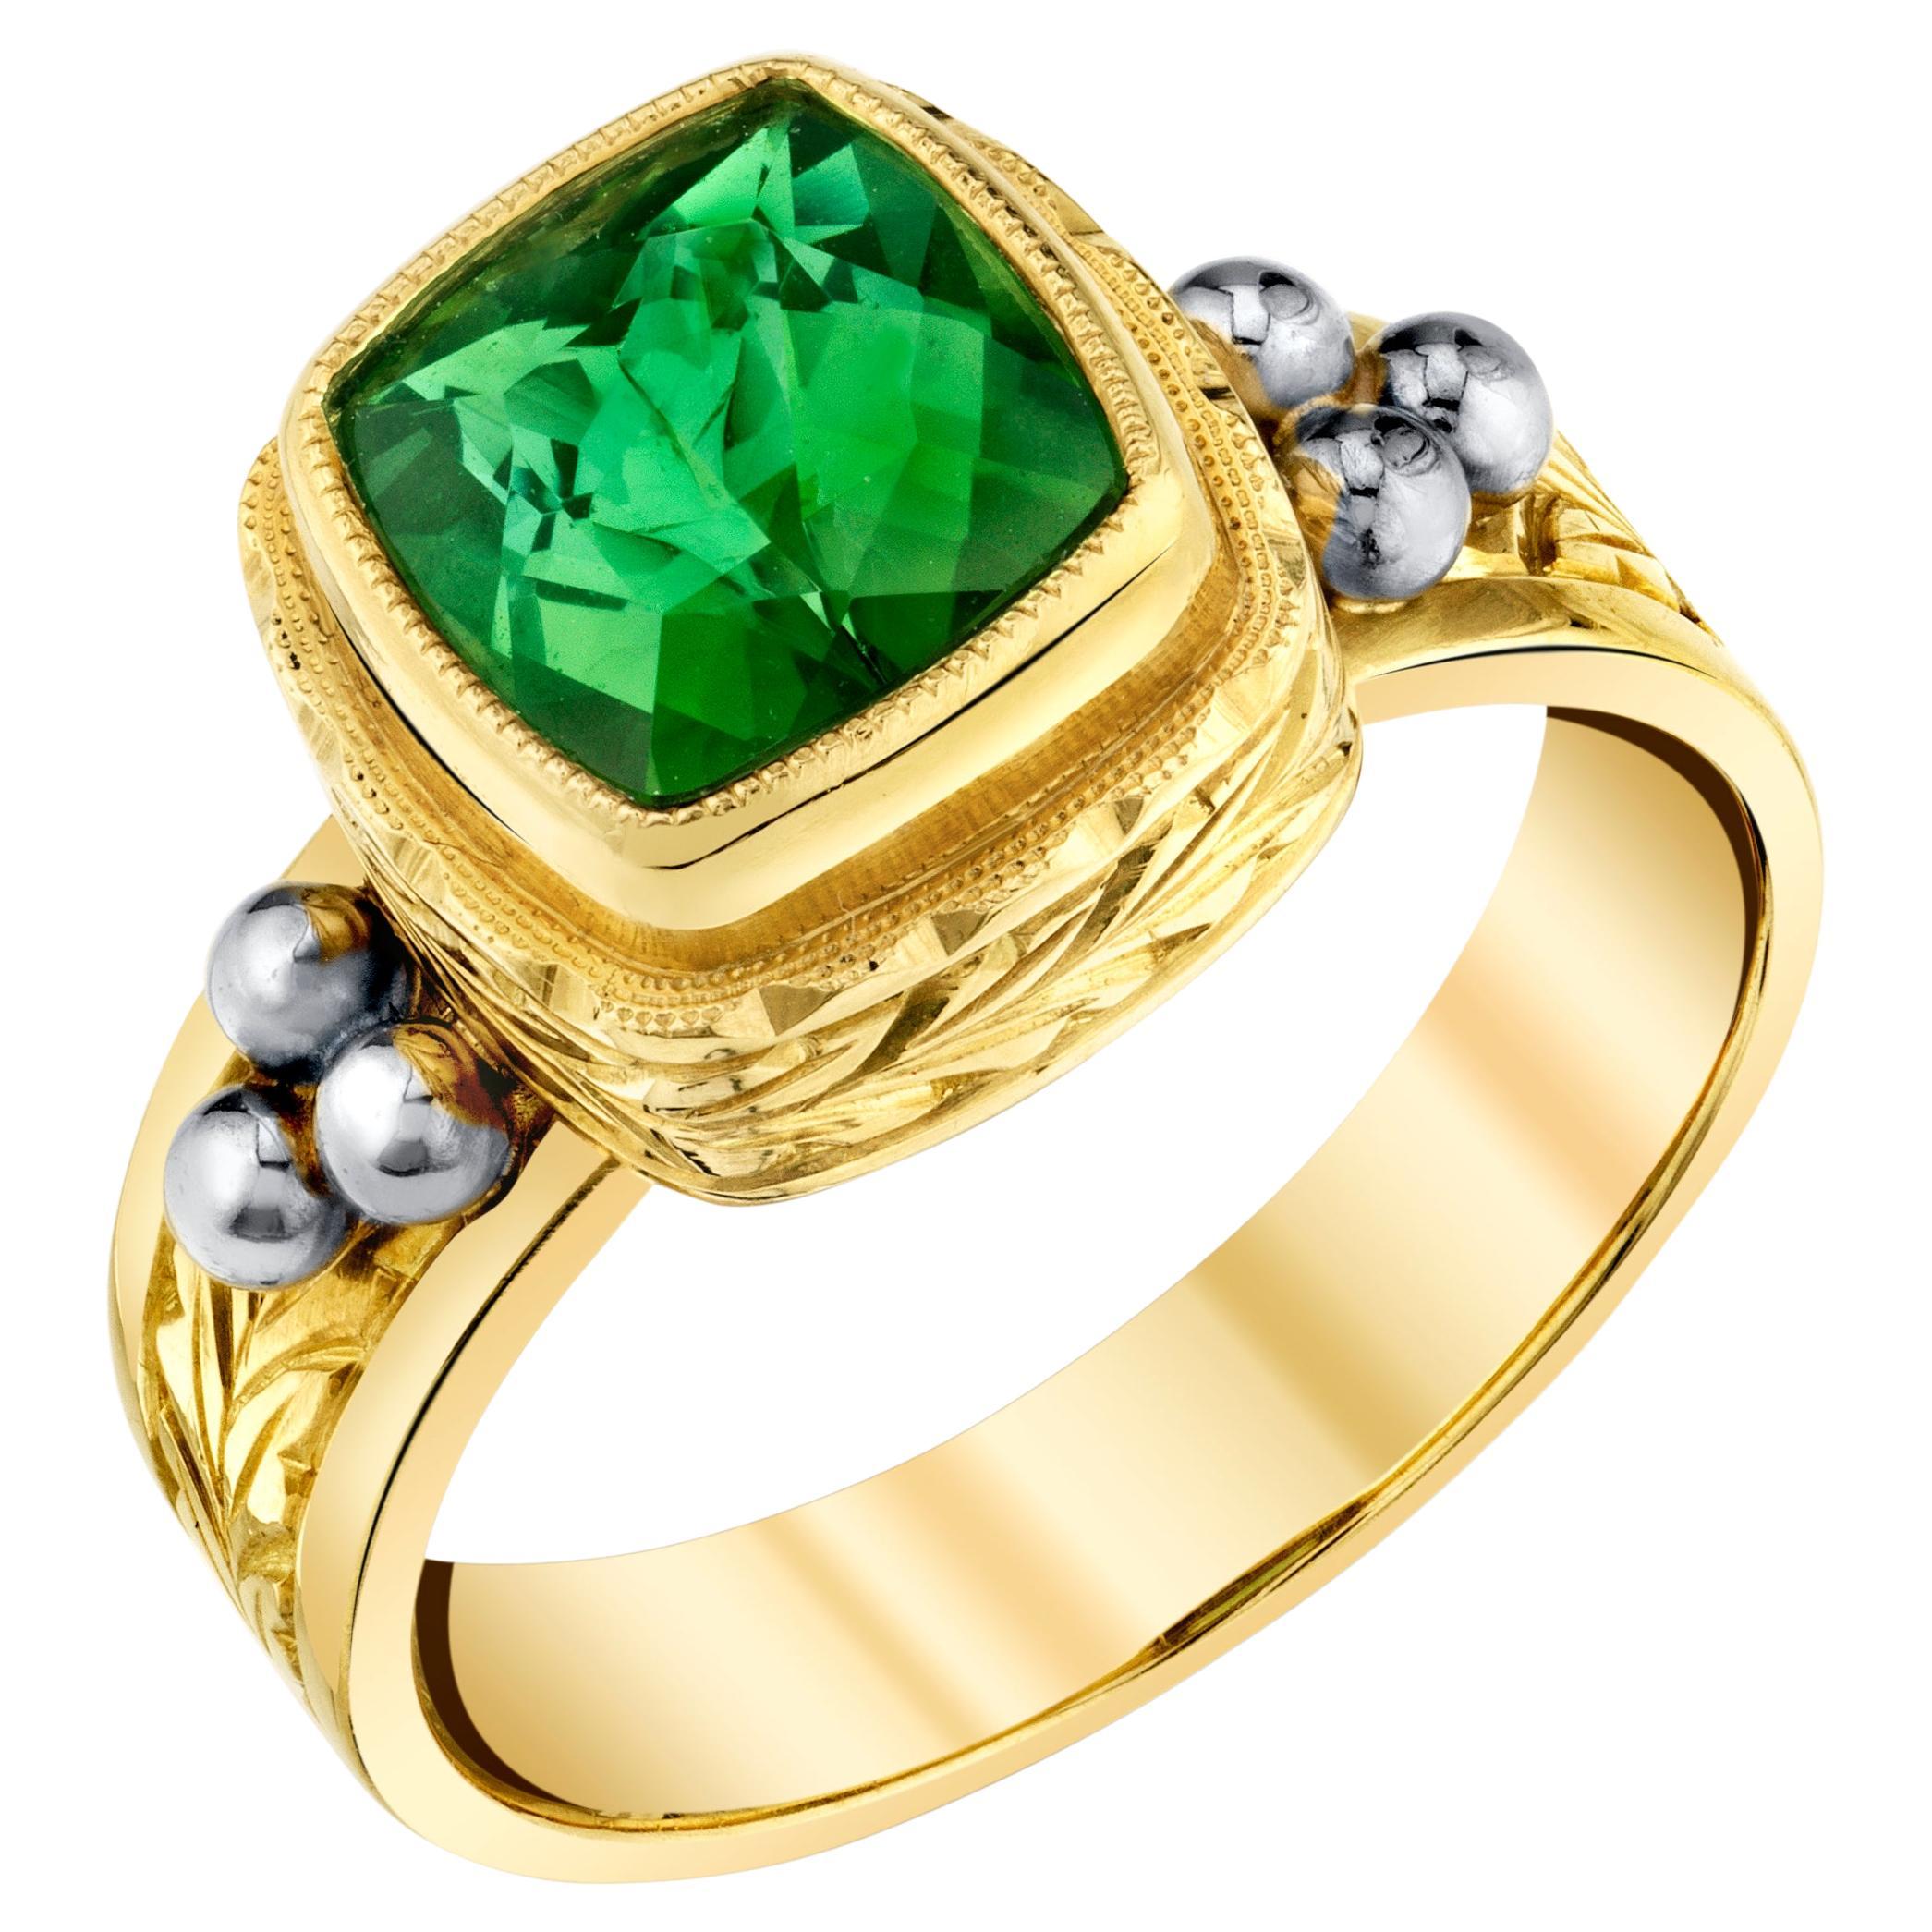 Green Tourmaline and Handmade 18k Yellow Gold Band Ring, 1.83 Carats For Sale